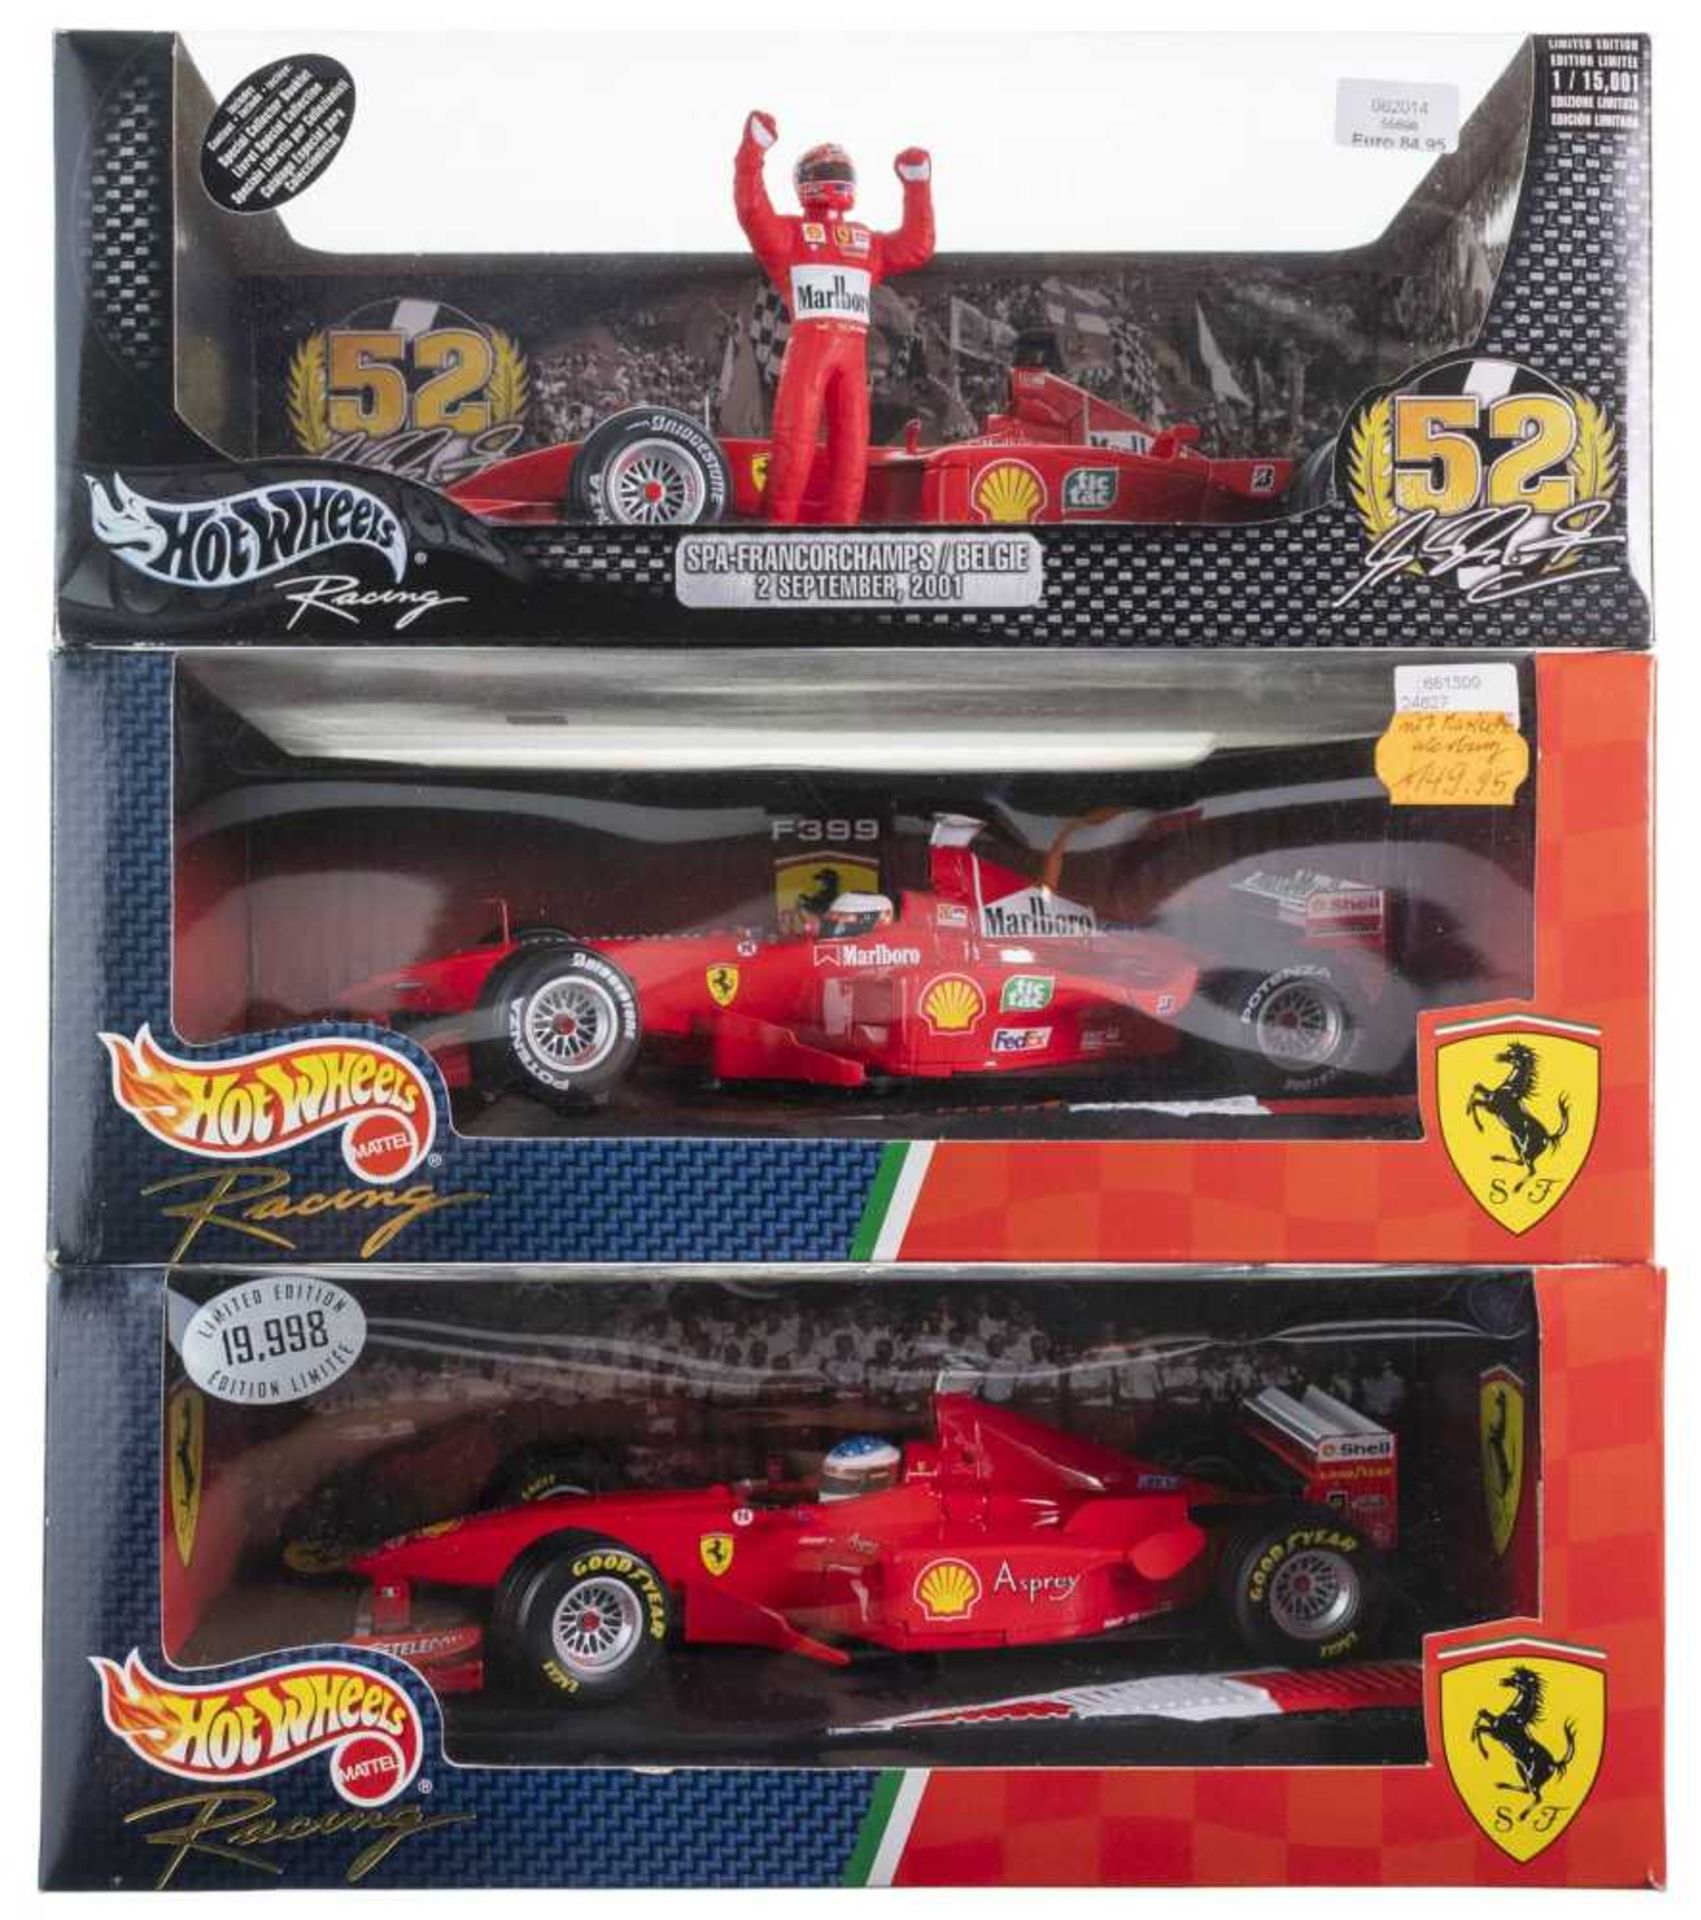 FERRARI F 300, F 399, F1 2000 \\King of Rain\\, F 2001 and the two of them special editions \\Spa Fr